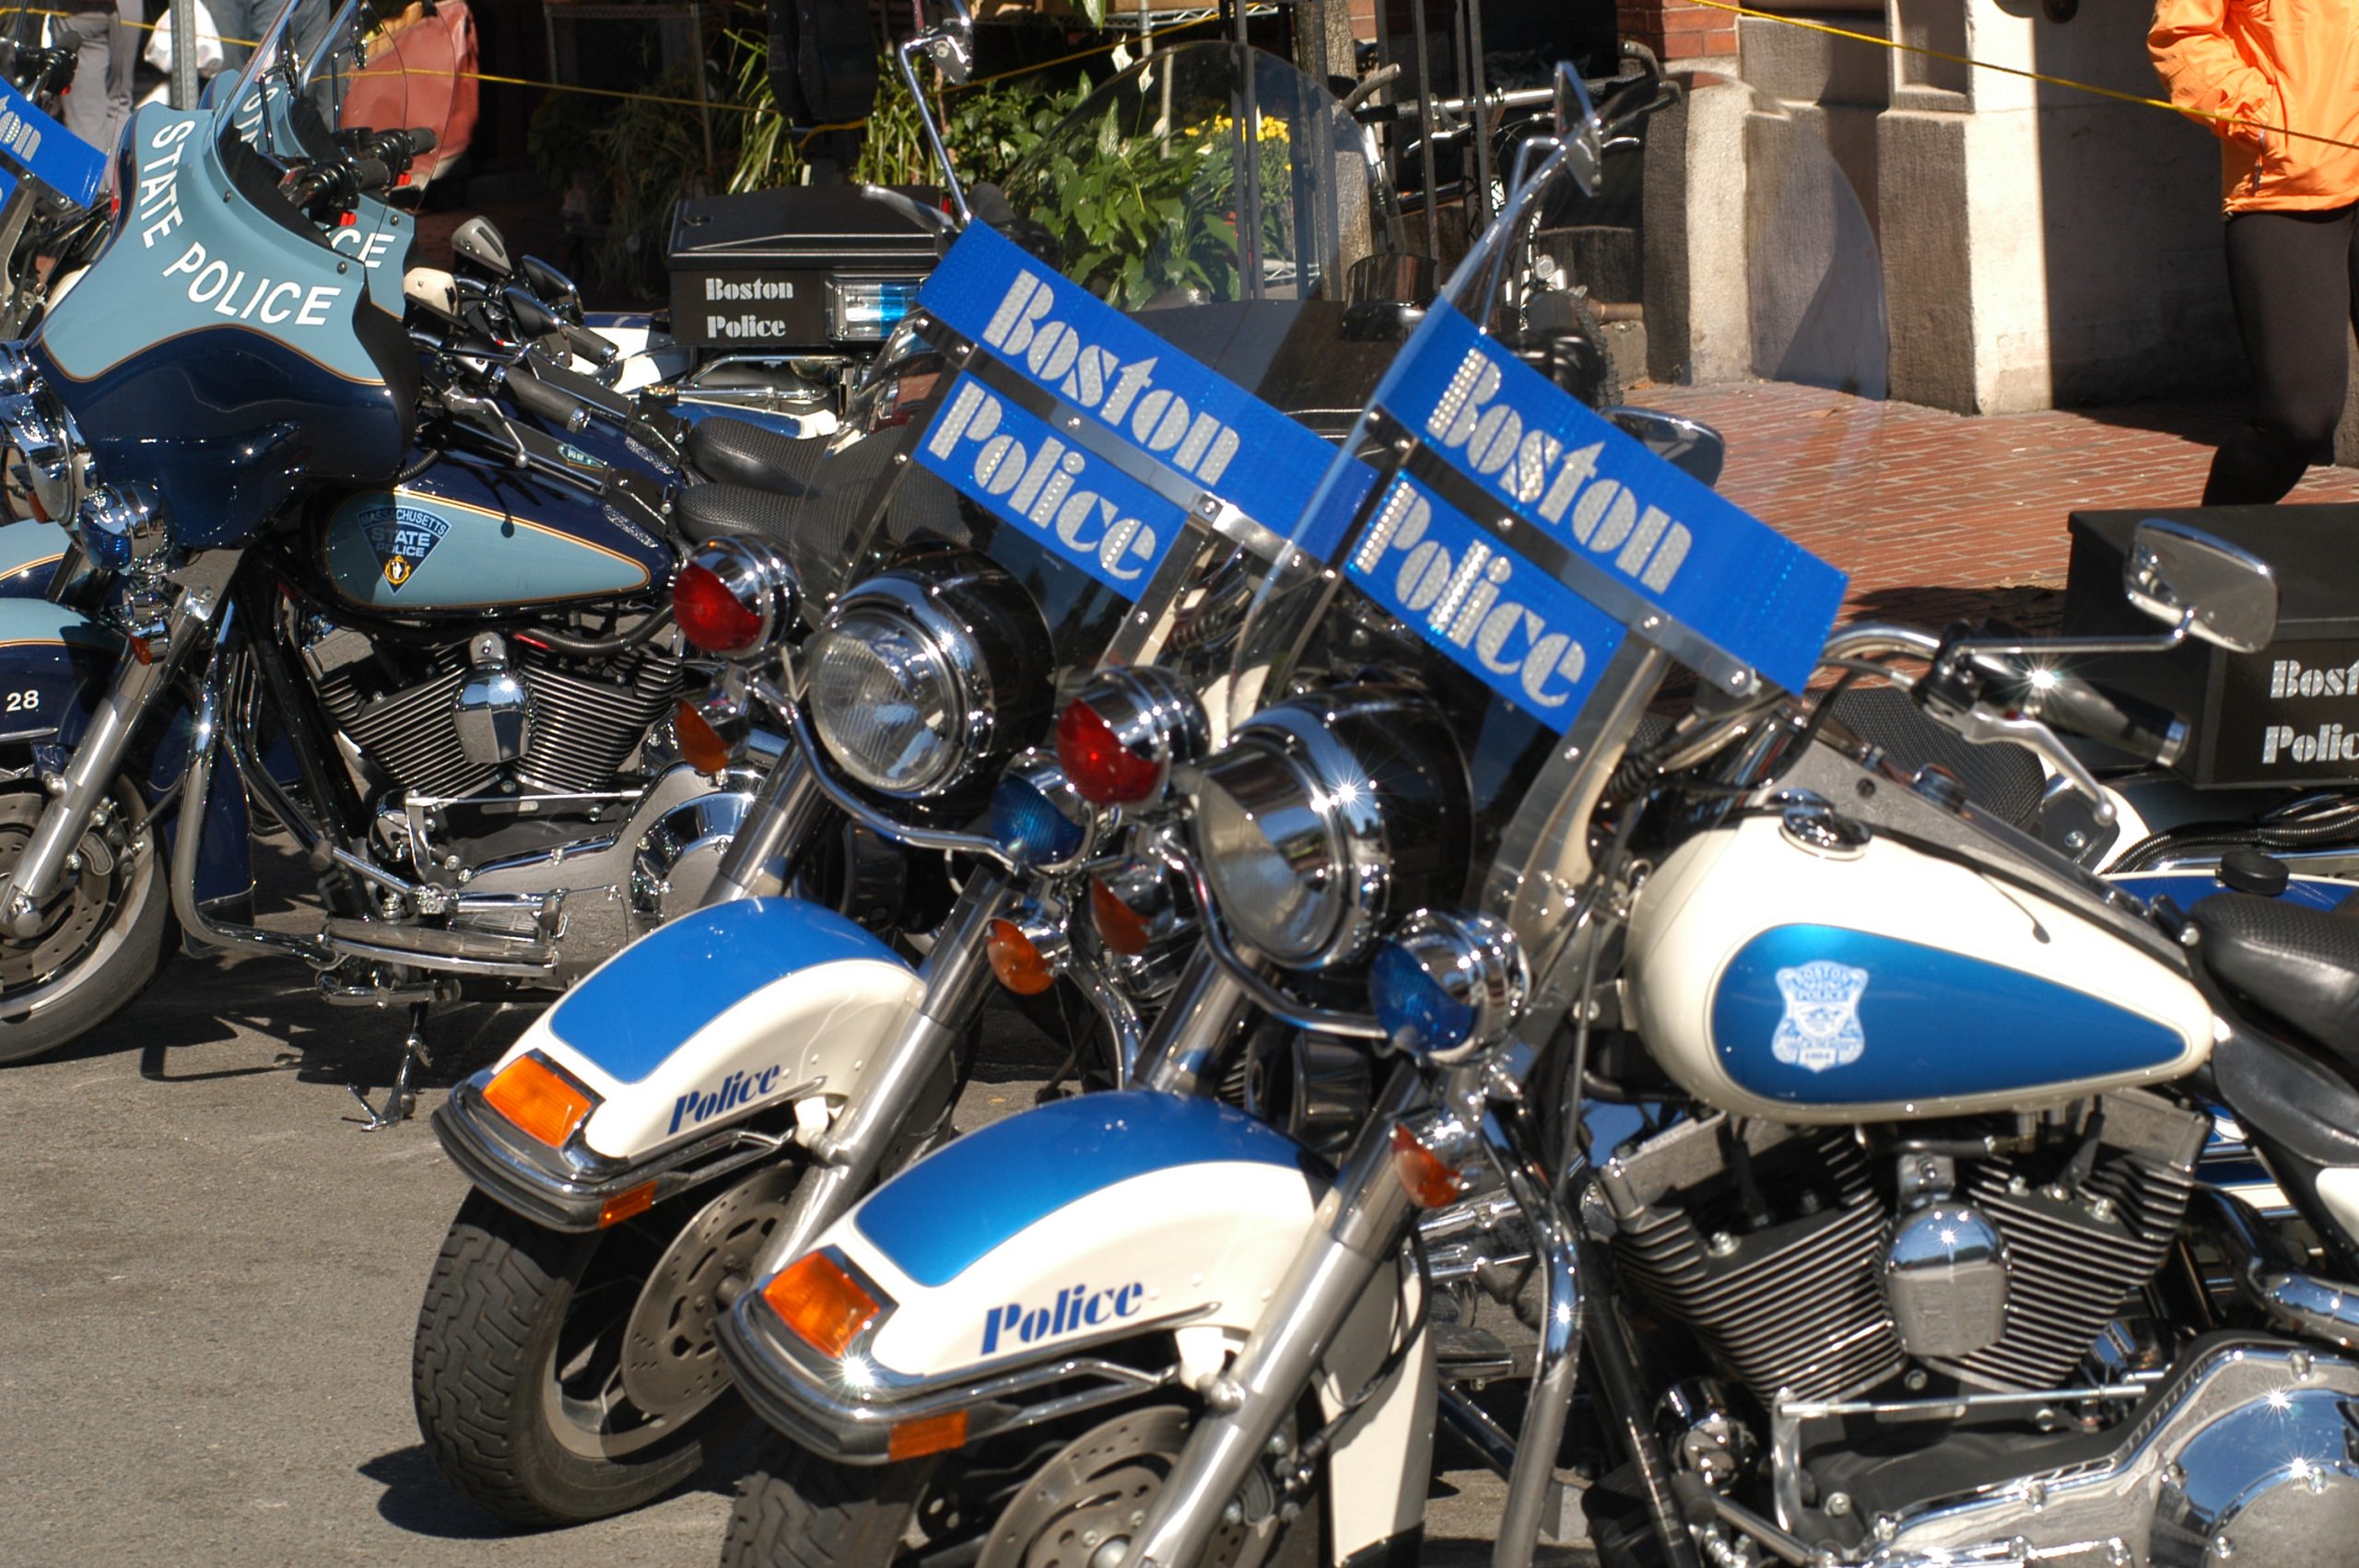 Police Motorcycles (user submitted)